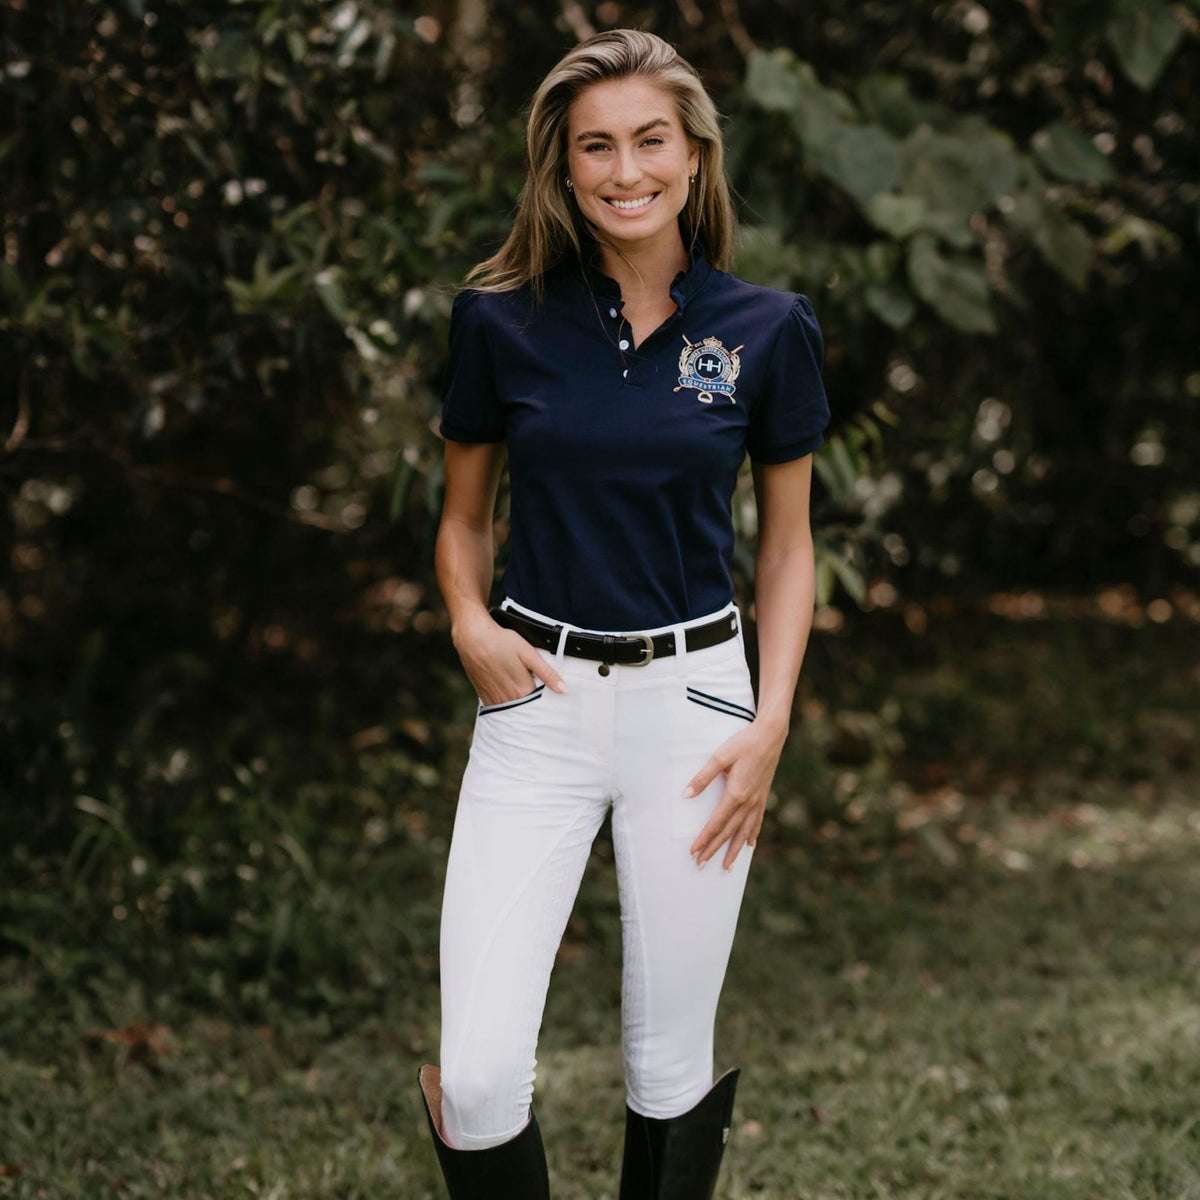 Lady wearing navy shirt with white breeches and black belt.